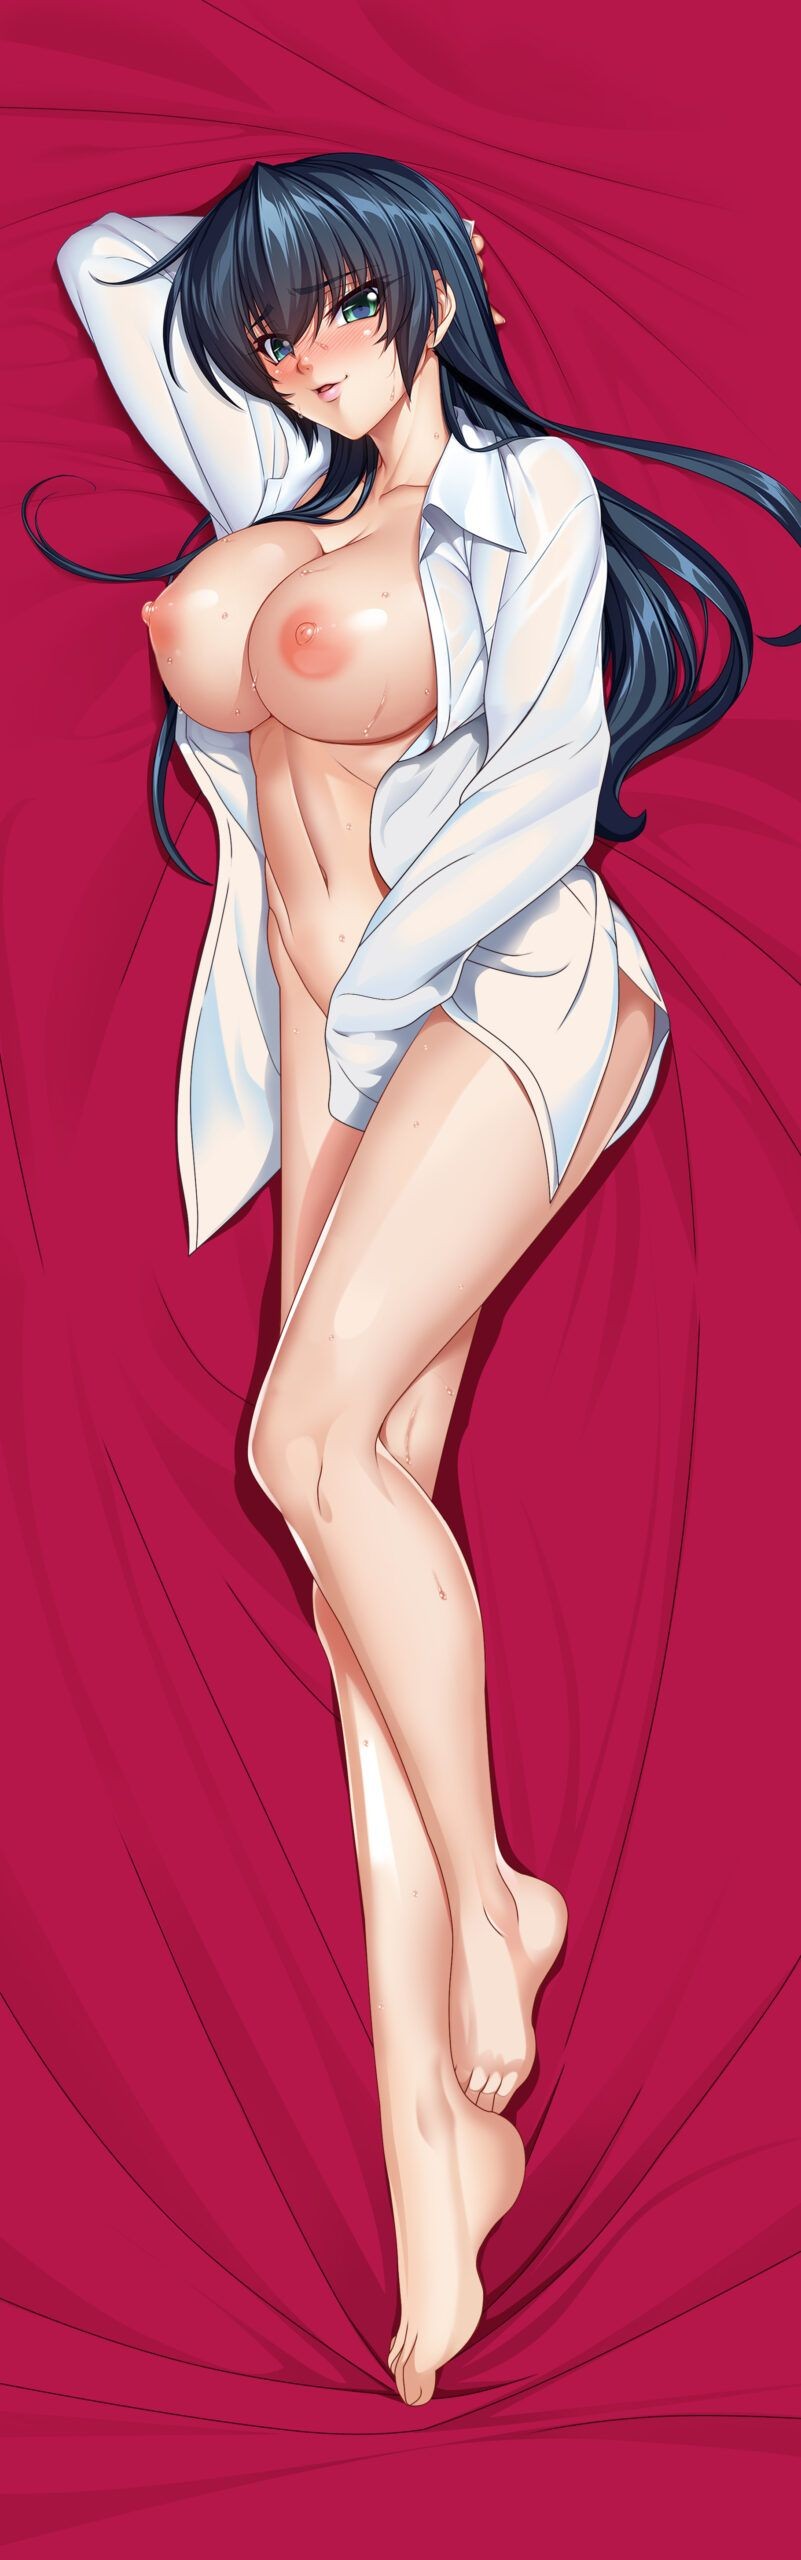 Puta 【Hugging Pillow】Images Of Erotic Hugging Pillowcases From Anime And Video Games Part 144 Homo